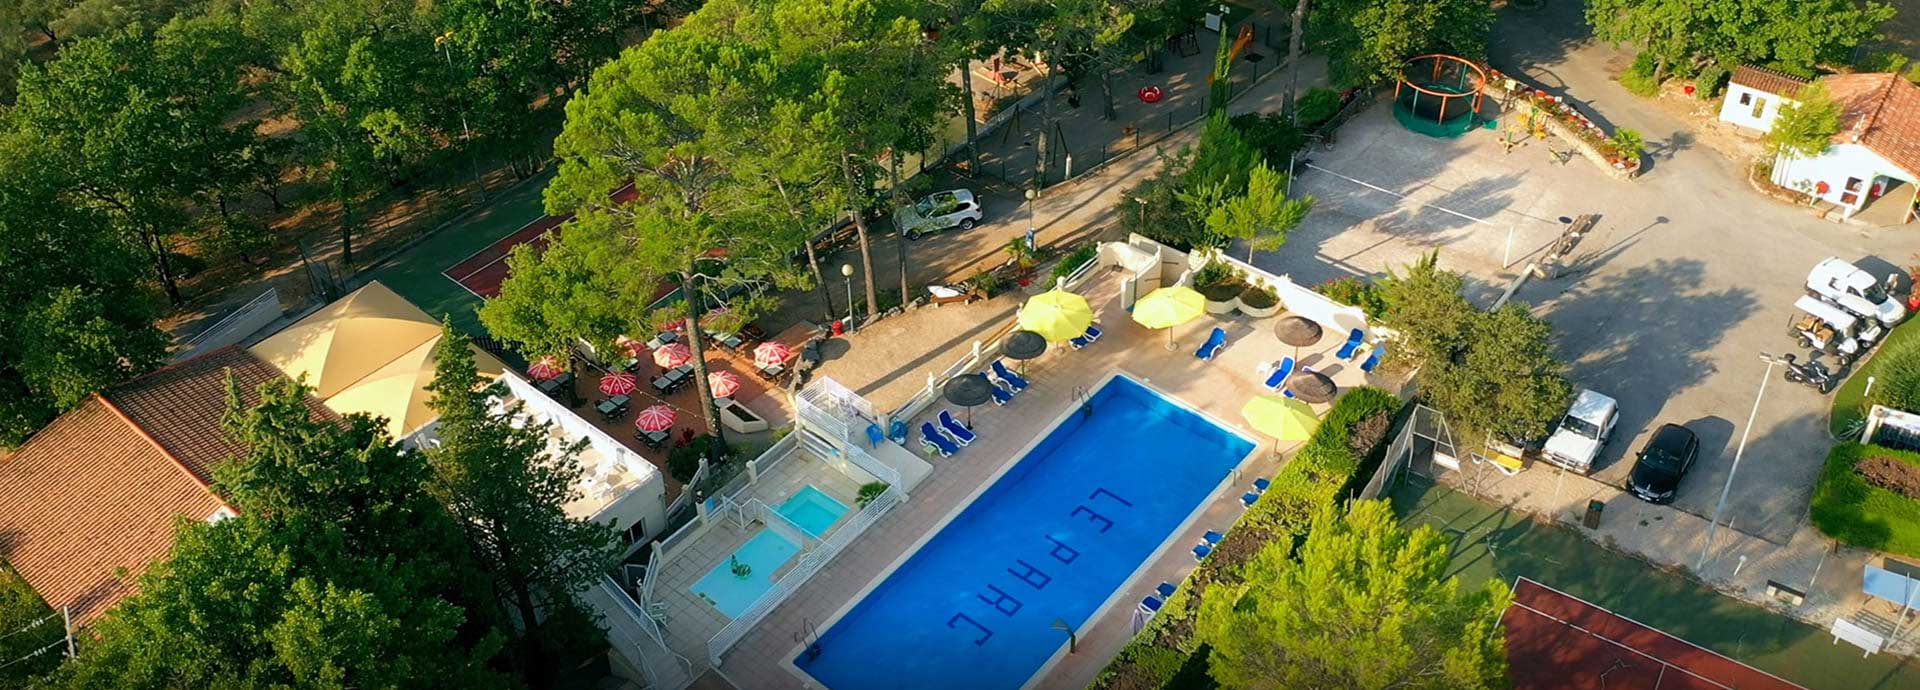 The 4 star Le Parc campsite is situated in the heart of nature, inland in the Var